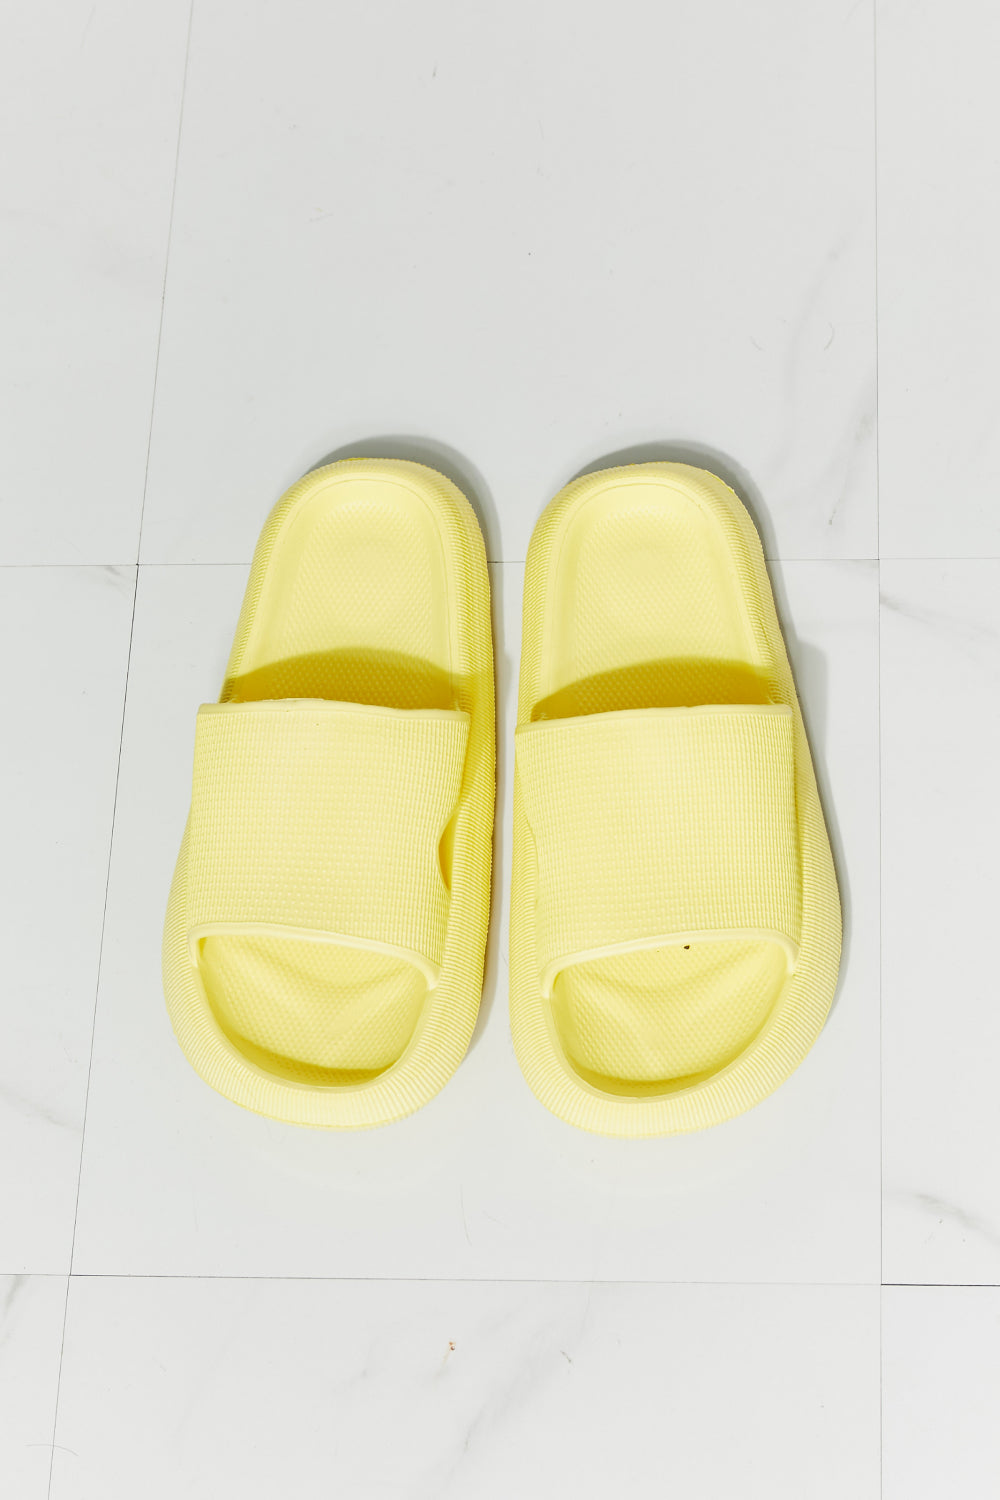 MMShoes Arms Around Me Open Toe Slide in Yellow - nailedmoms